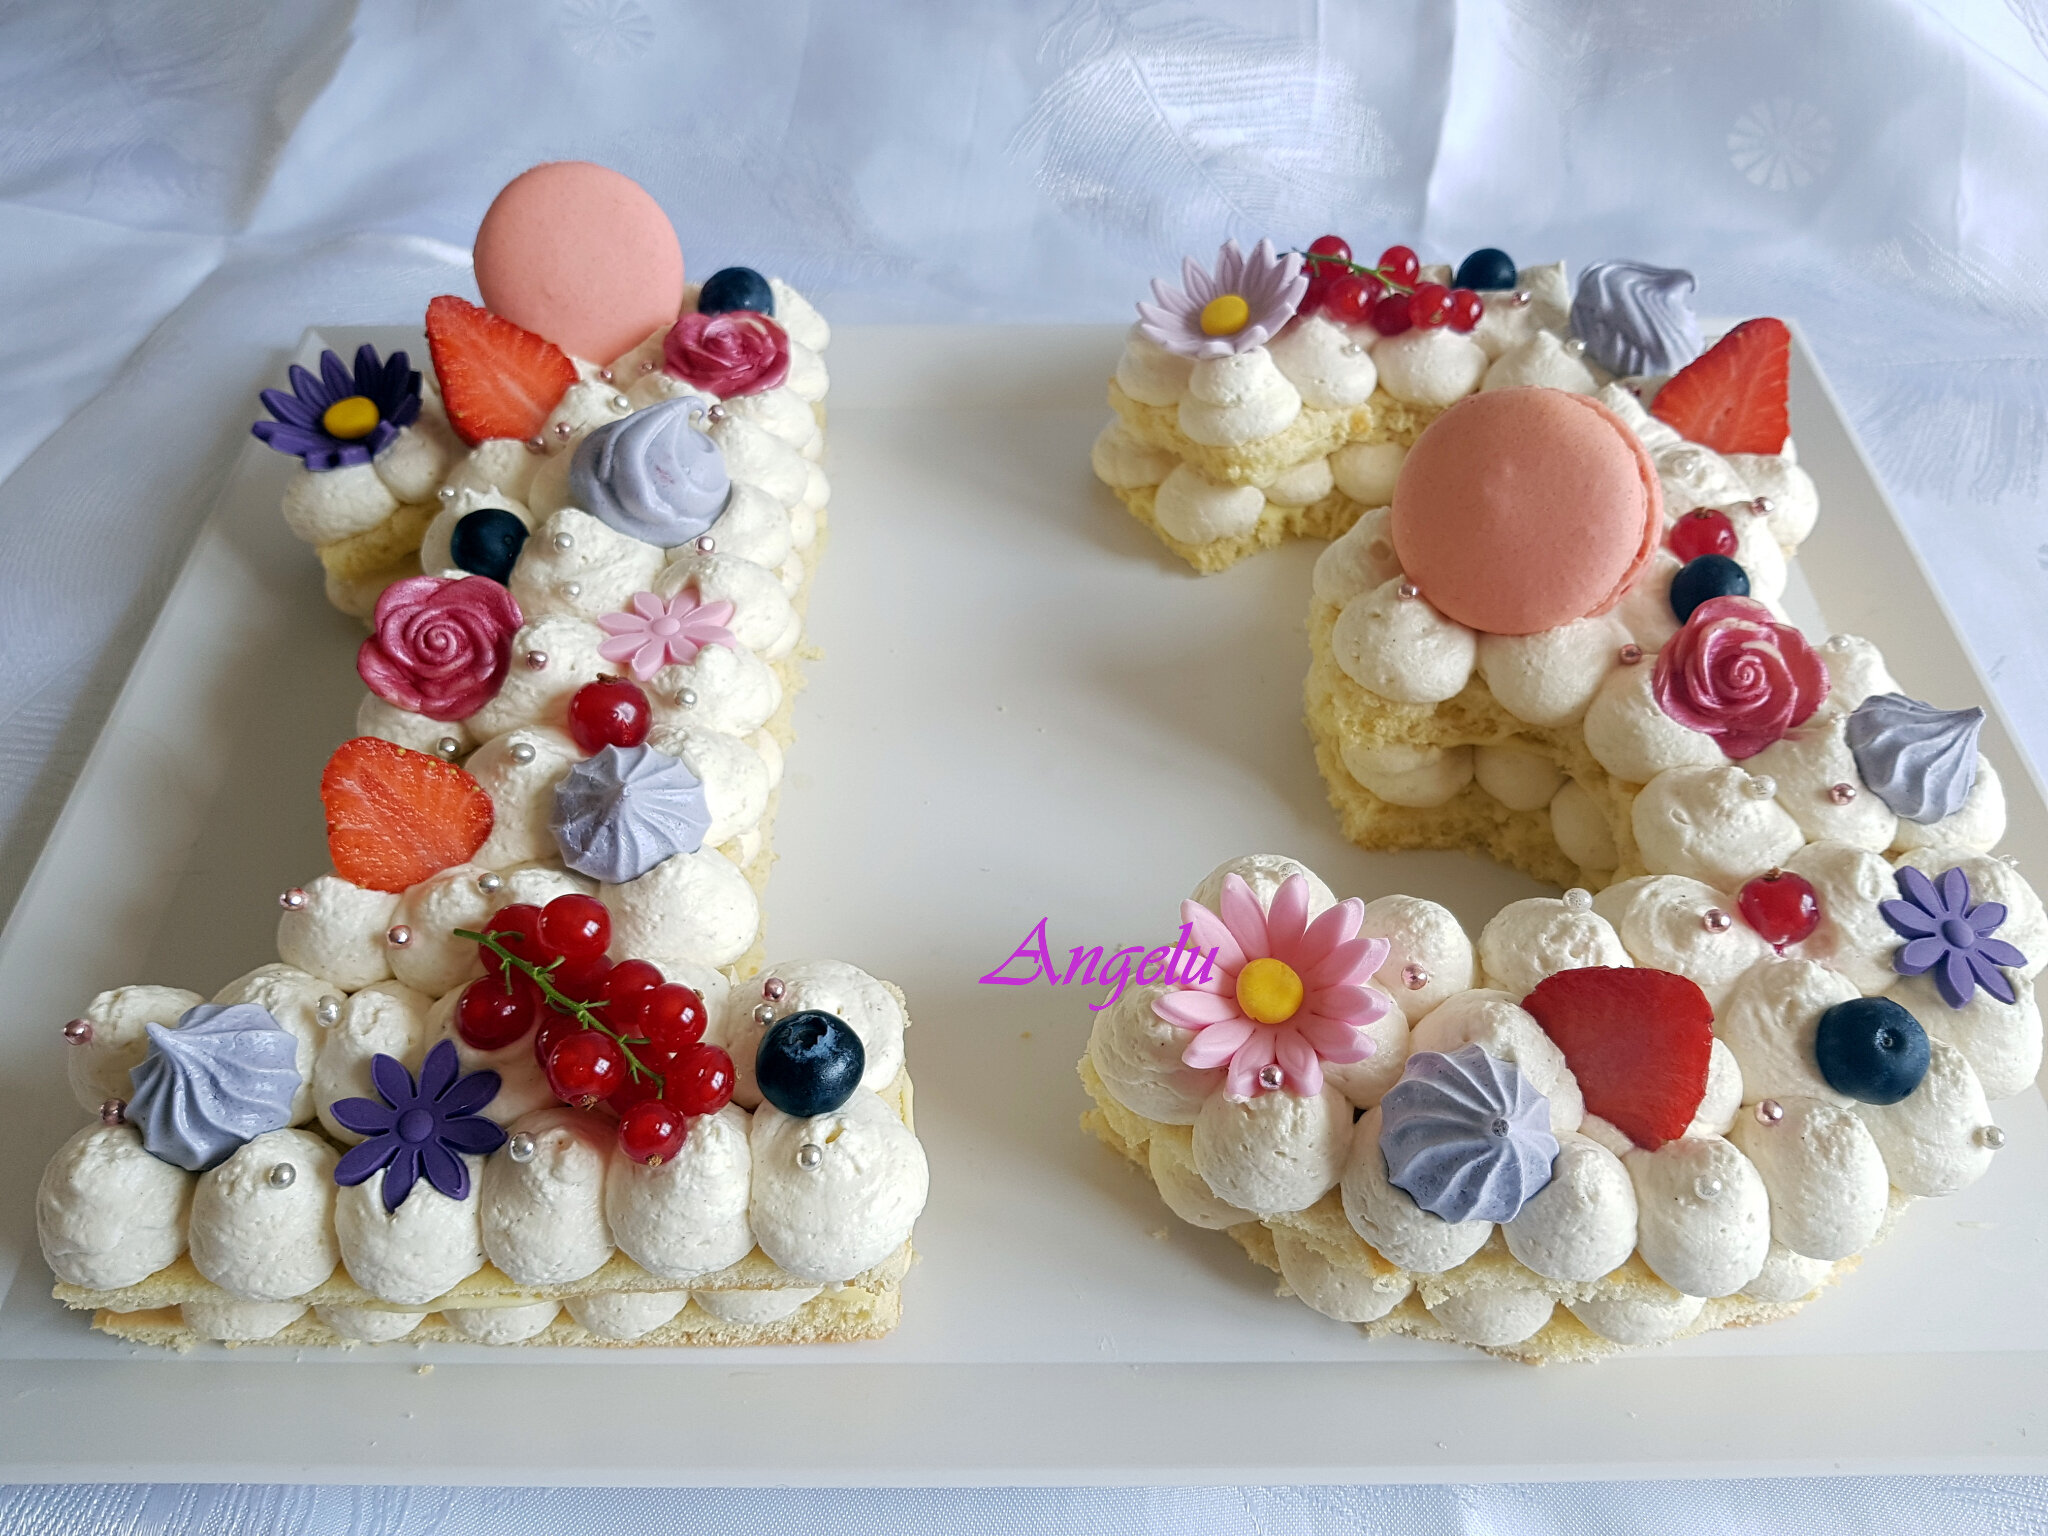 Number Cake 13 Letter Cake A Ma Petite Patisserie Contact Isilda Neuf Fr